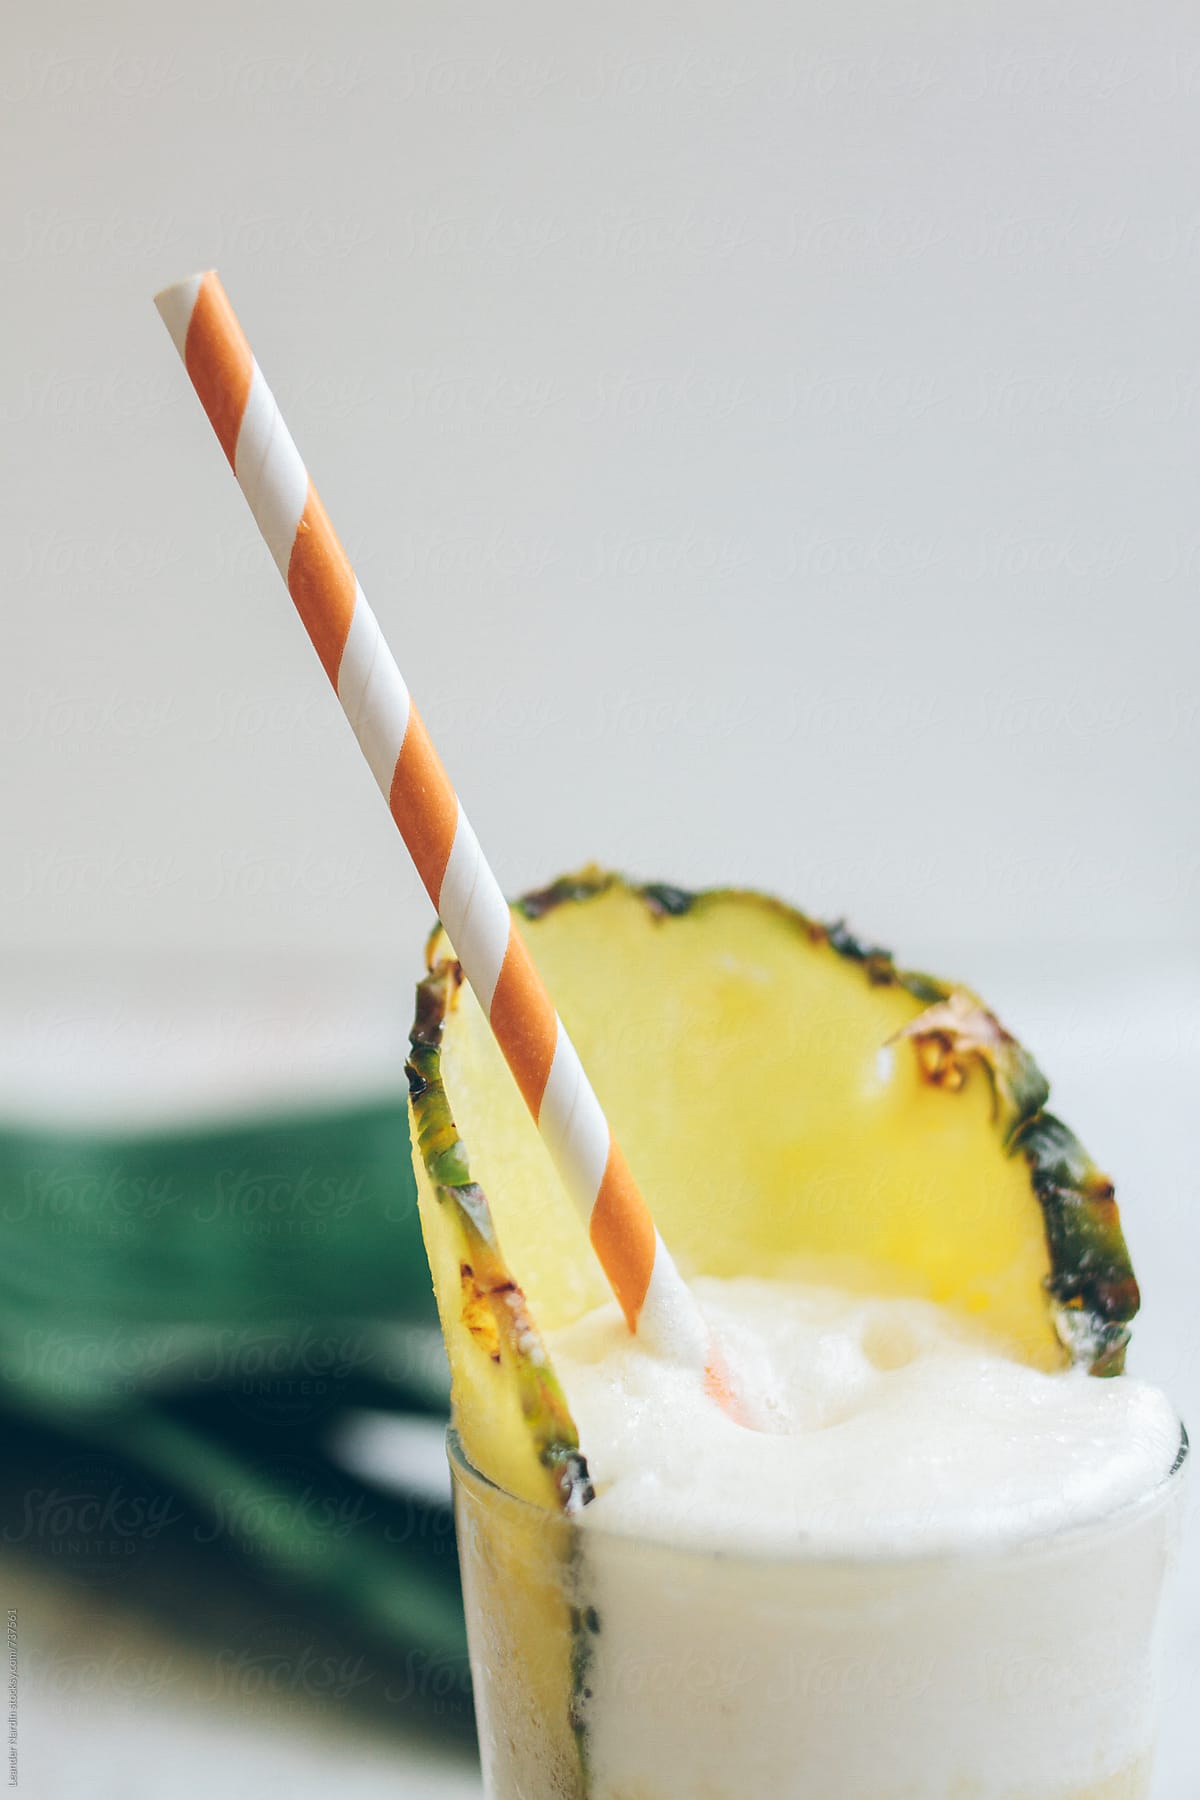 close up of a pina colada cocktail with a pineapple garnish and colorful drinking straw